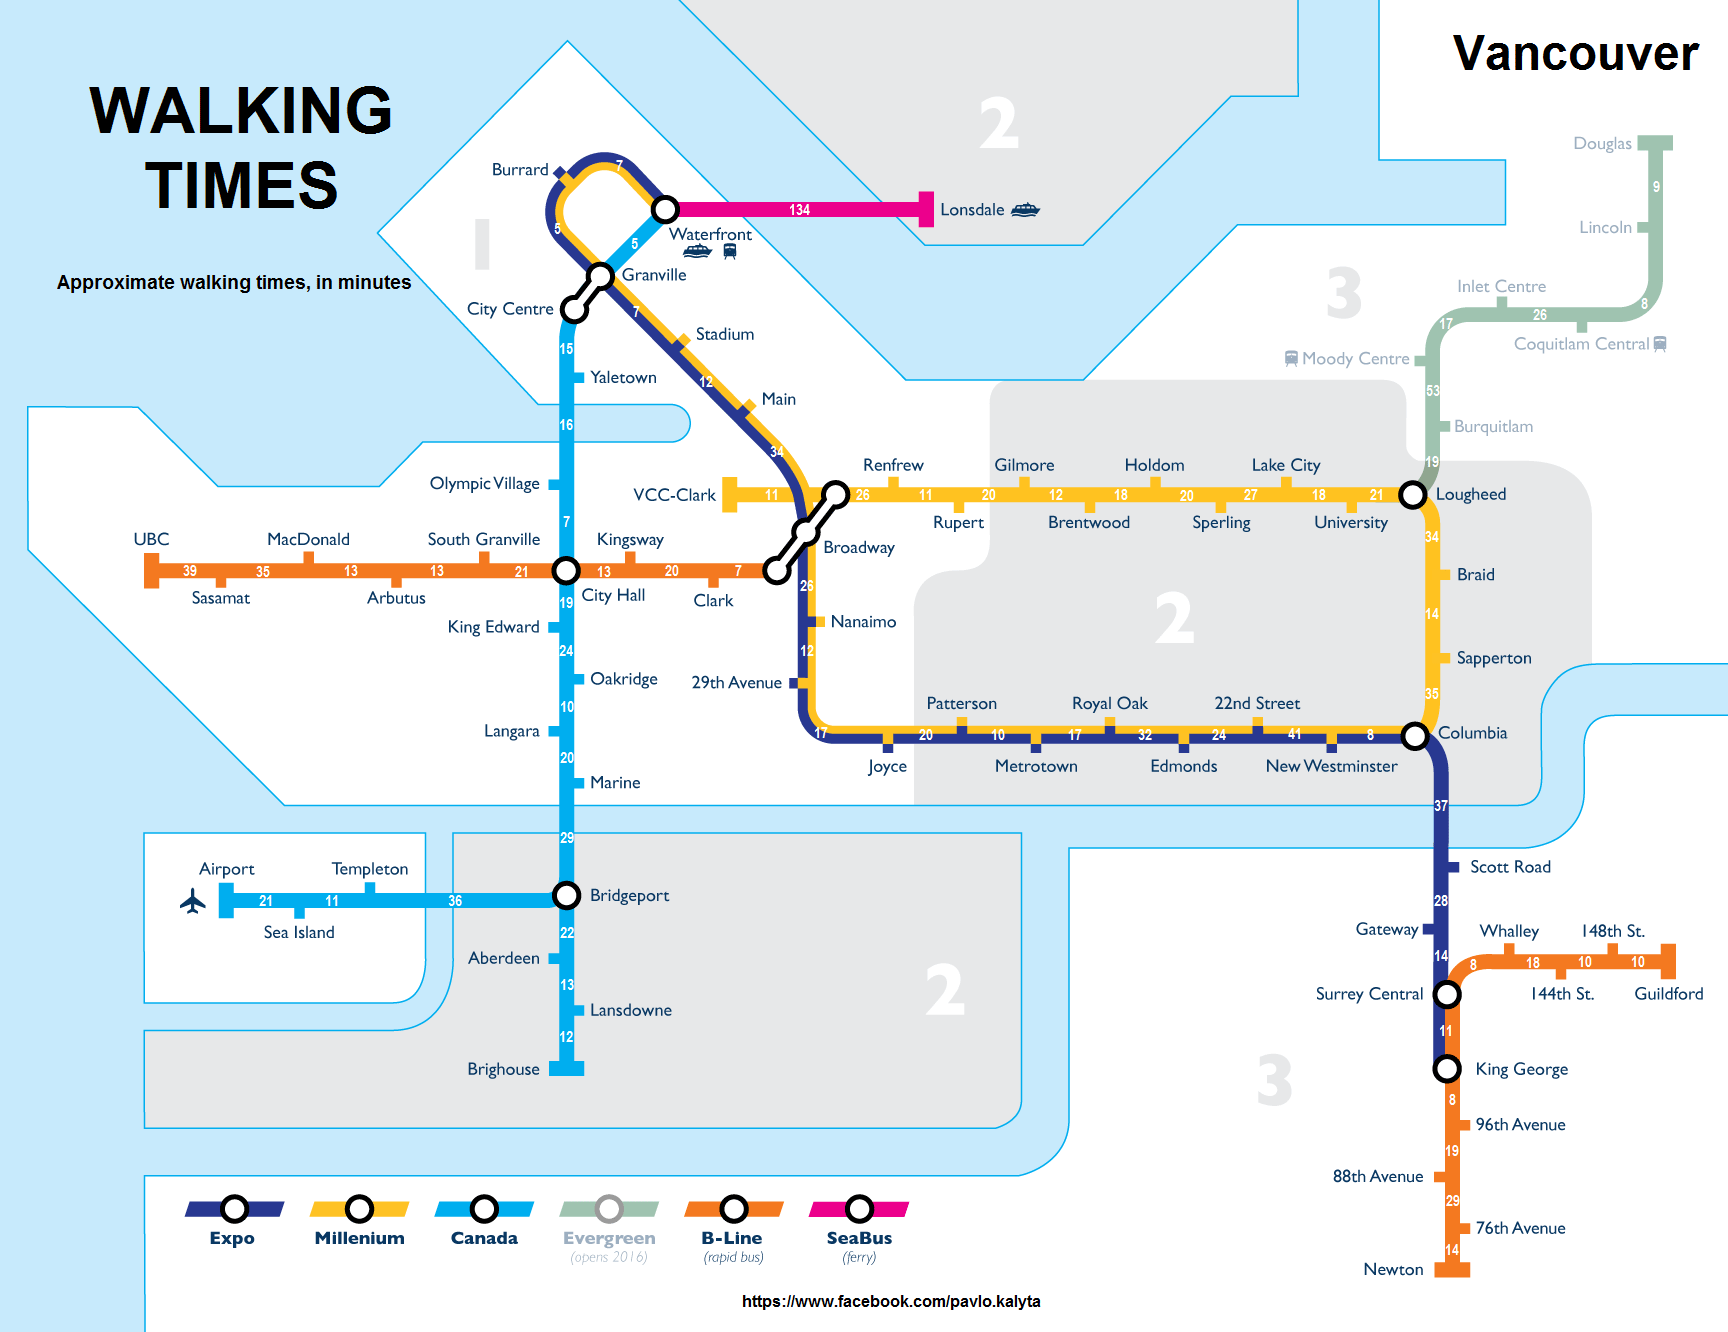 skytrain route map vancouver Vancouver Map Showing Walking Times Between Skytrain Stations And B Line Stops Inside Vancouver Bloginside Vancouver Blog skytrain route map vancouver